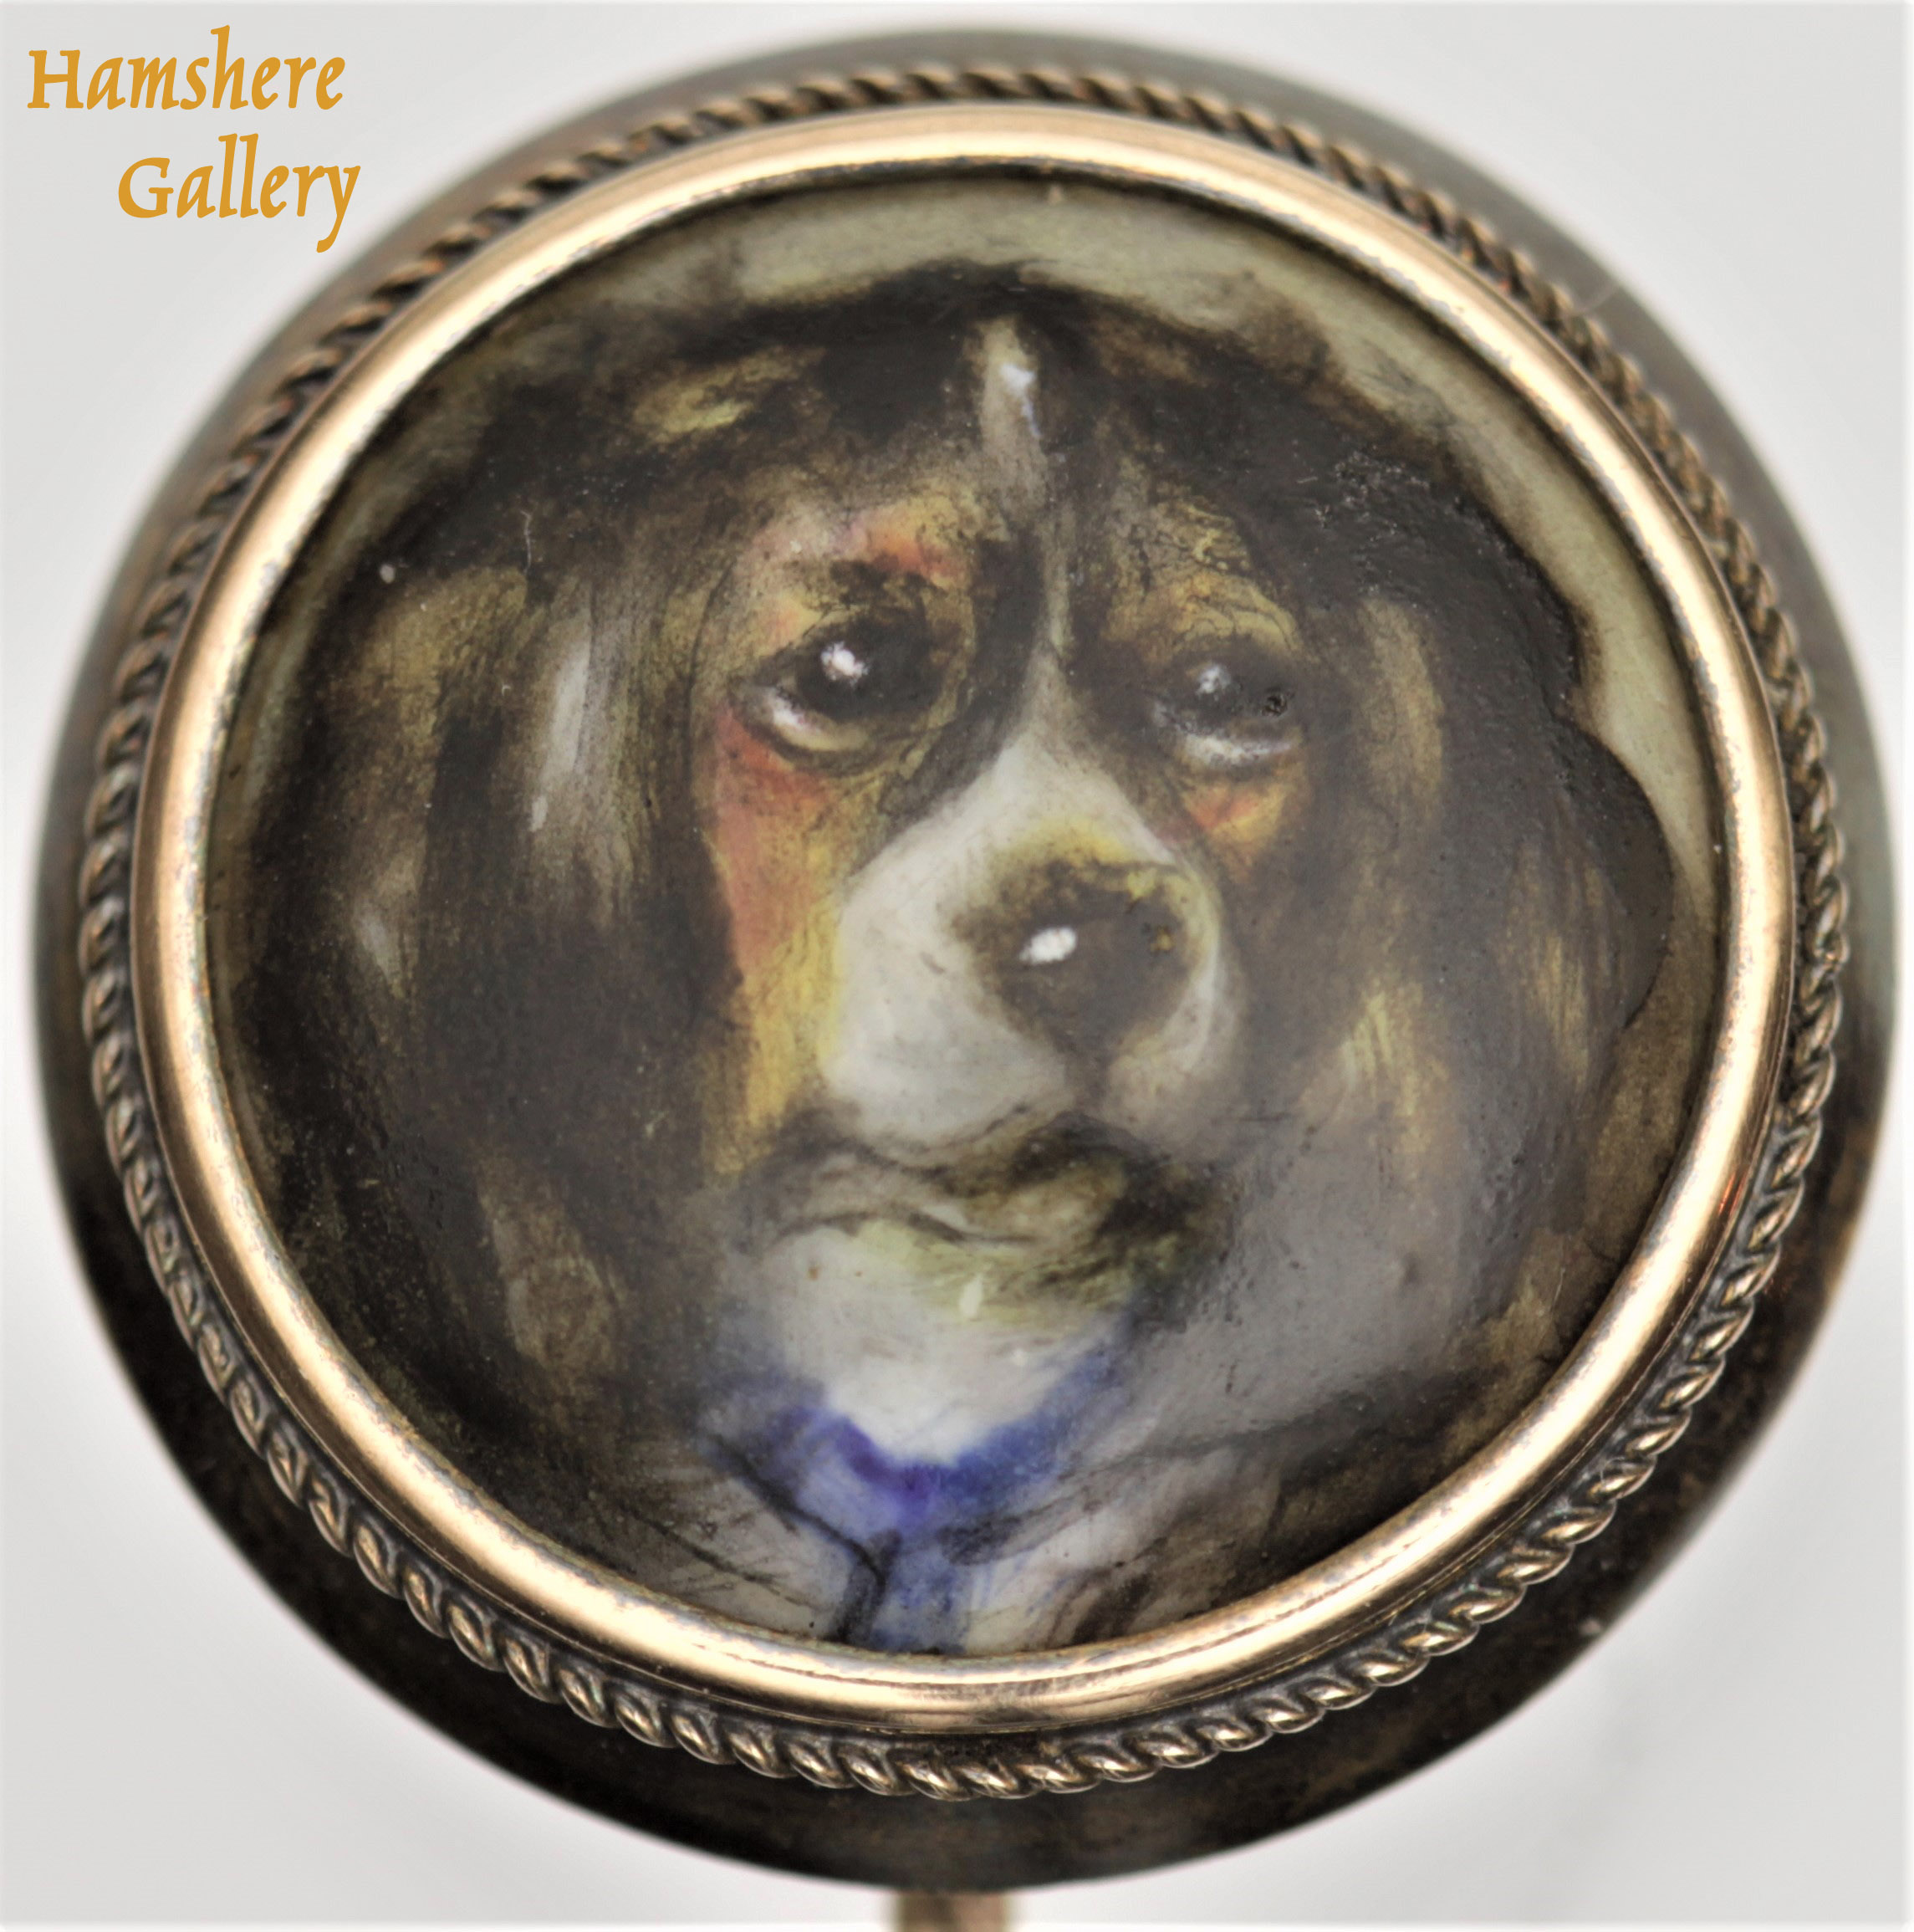 Click for larger image: Kings Charles Cavalier Tricolor Spaniel enamel gold stick pin by William Essex (English, 1784-1869) - Kings Charles Cavalier Tricolor Spaniel enamel gold stick pin by William Essex (English, 1784-1869)